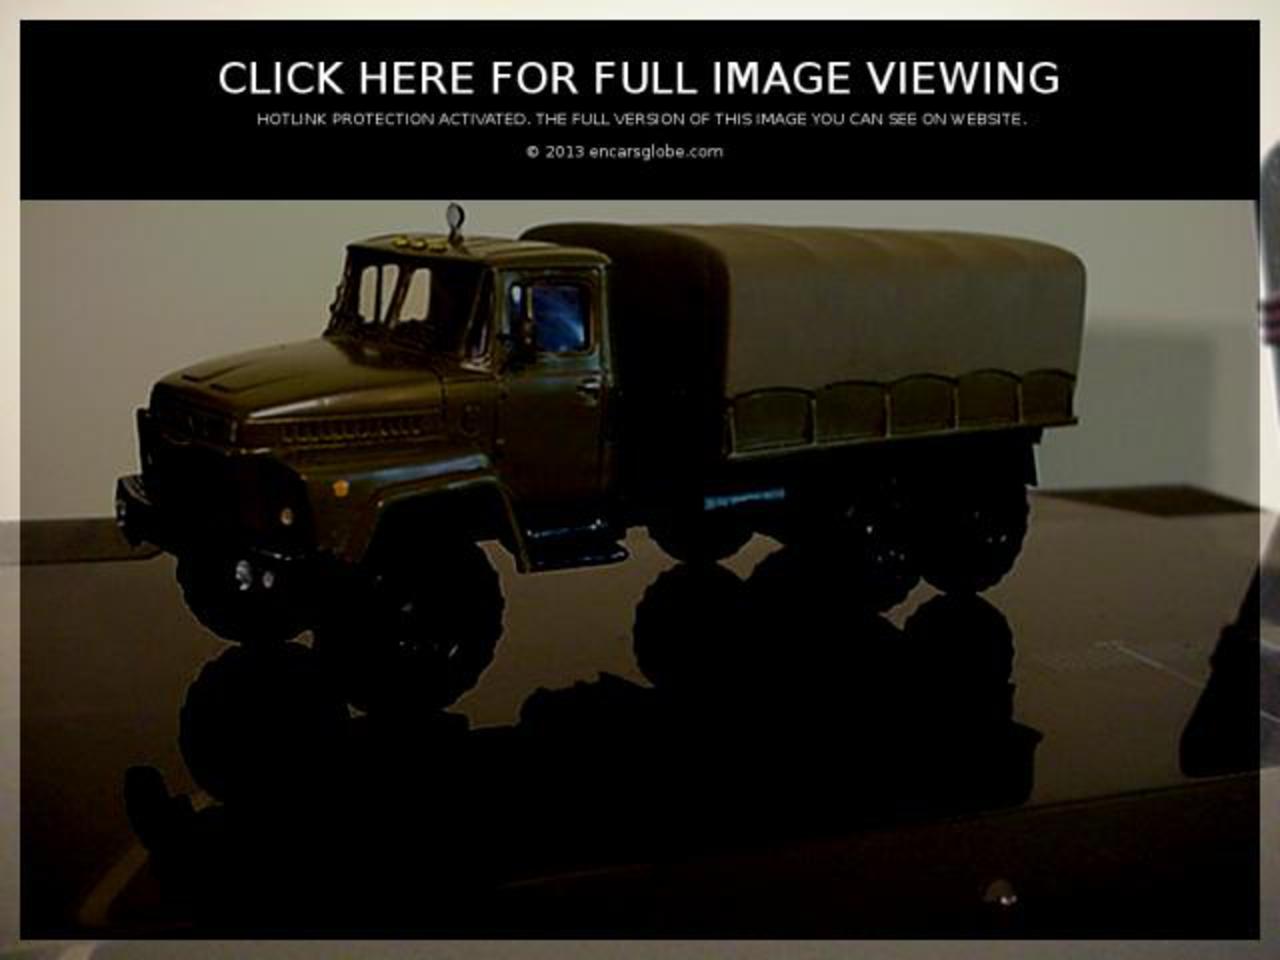 KrAZ 260 Photo Gallery: Photo #08 out of 11, Image Size - 640 x 480 px